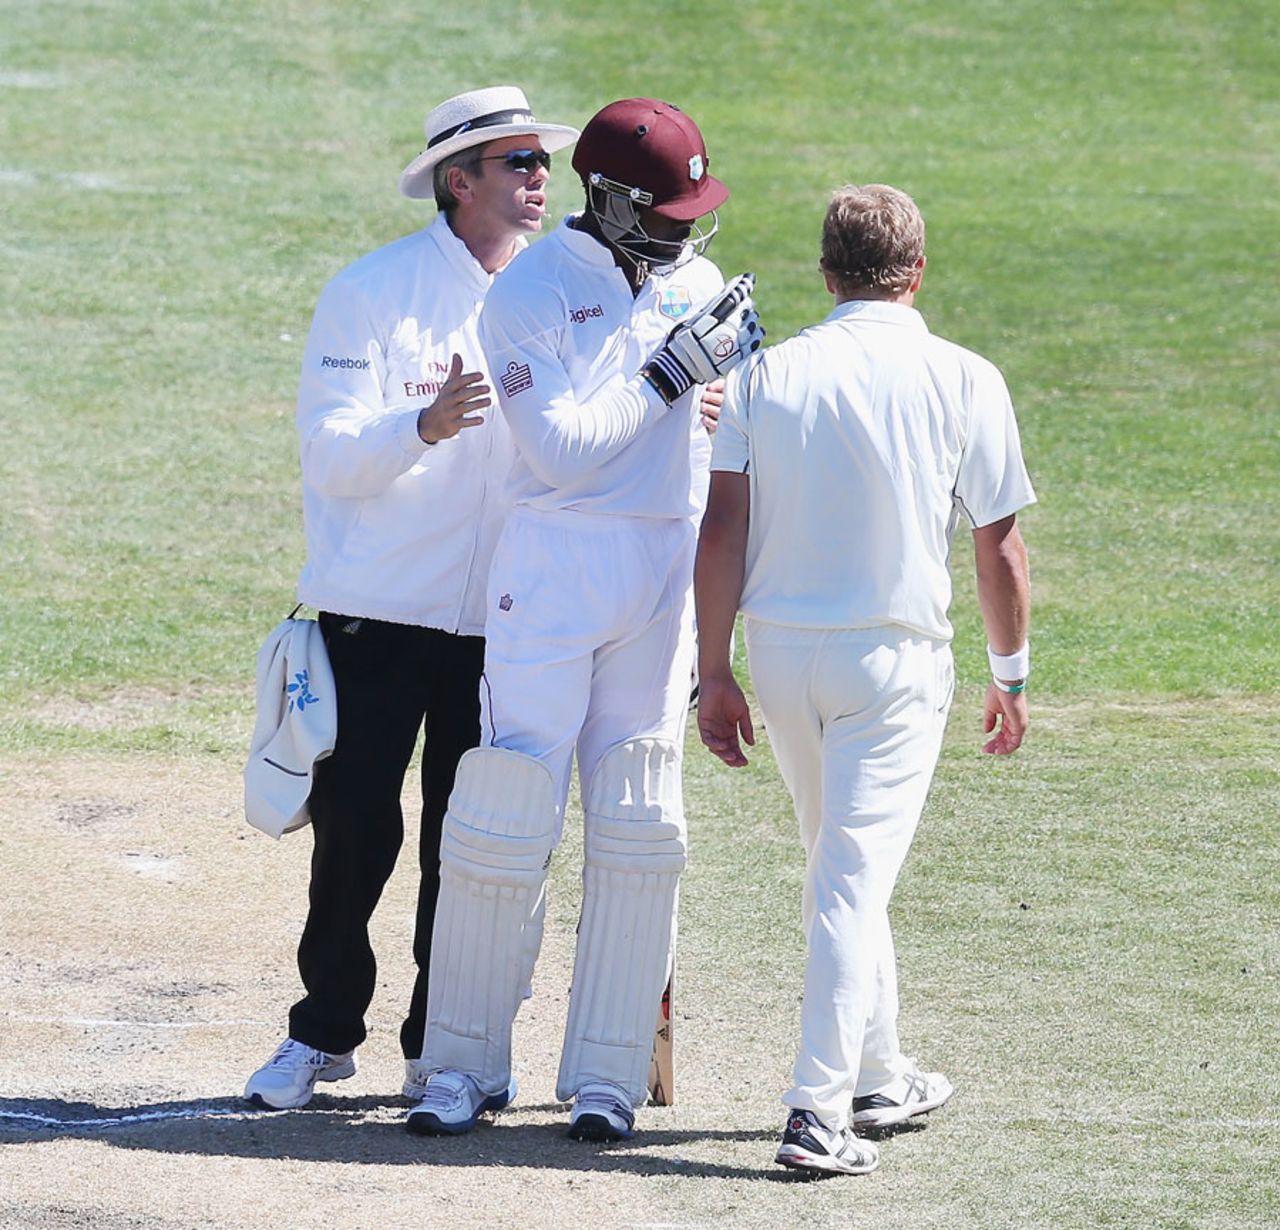 Kirk Edwards and Neil Wagner get into a tiff, New Zealand v West Indies, 1st Test, Dunedin, 3rd day, December 5, 2013